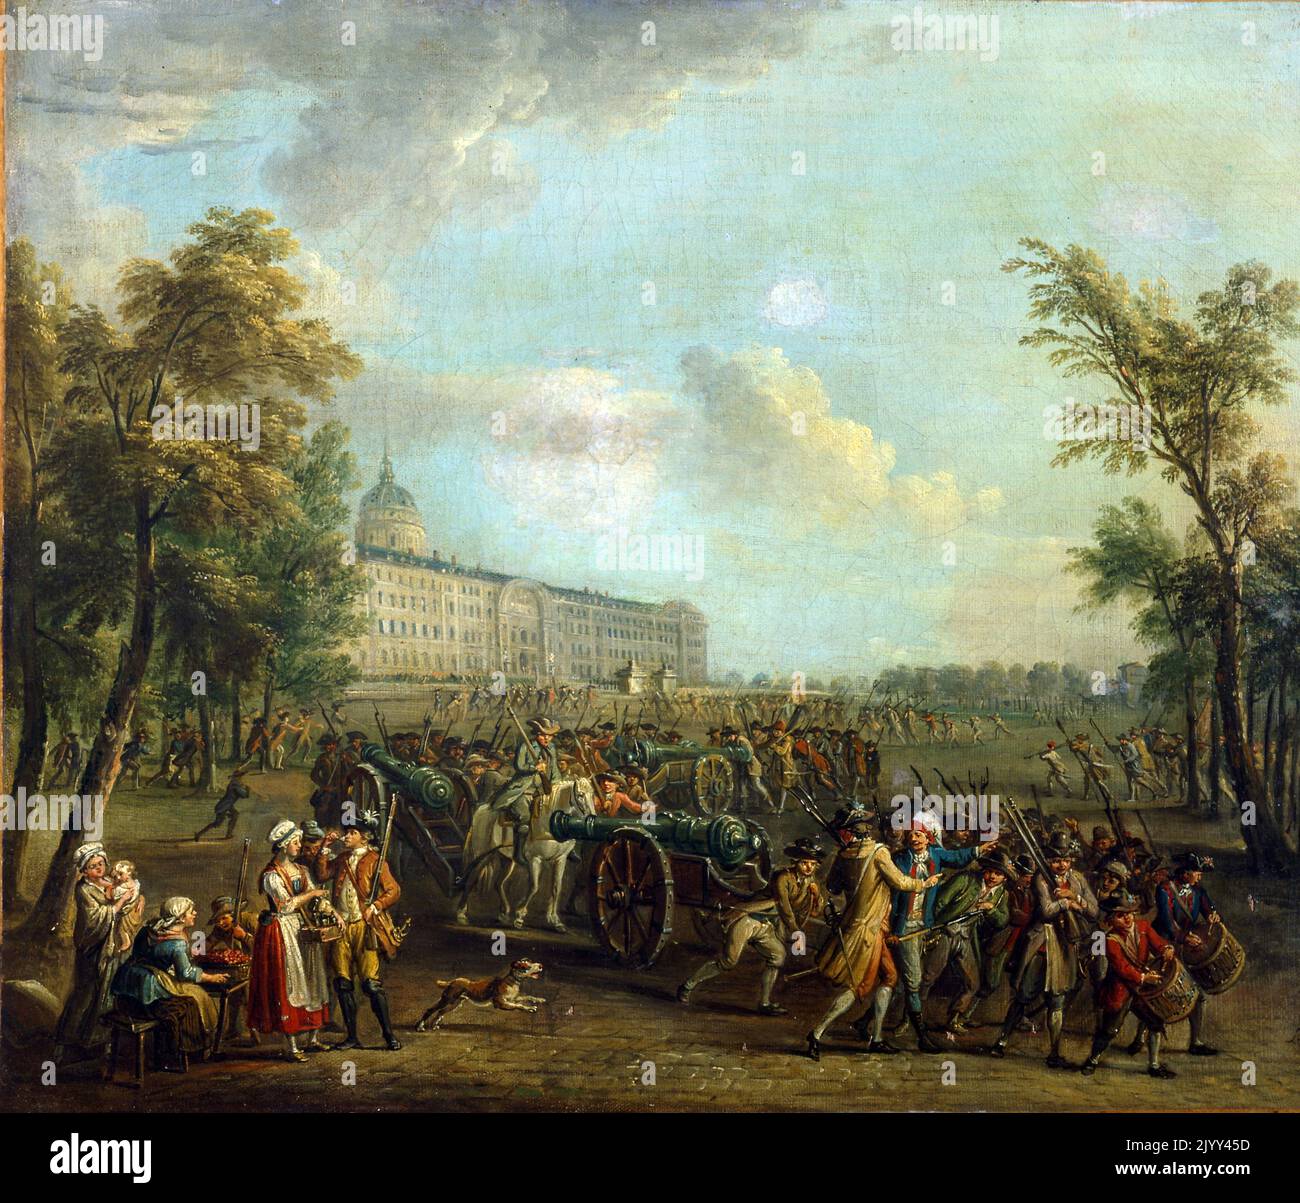 Jean-Baptiste Lallemand 'Pillage des armes aux Invalides', 1789 (Looting the weapons to the Invalides on the morning of July 14, 1789), oil on canvas Stock Photo